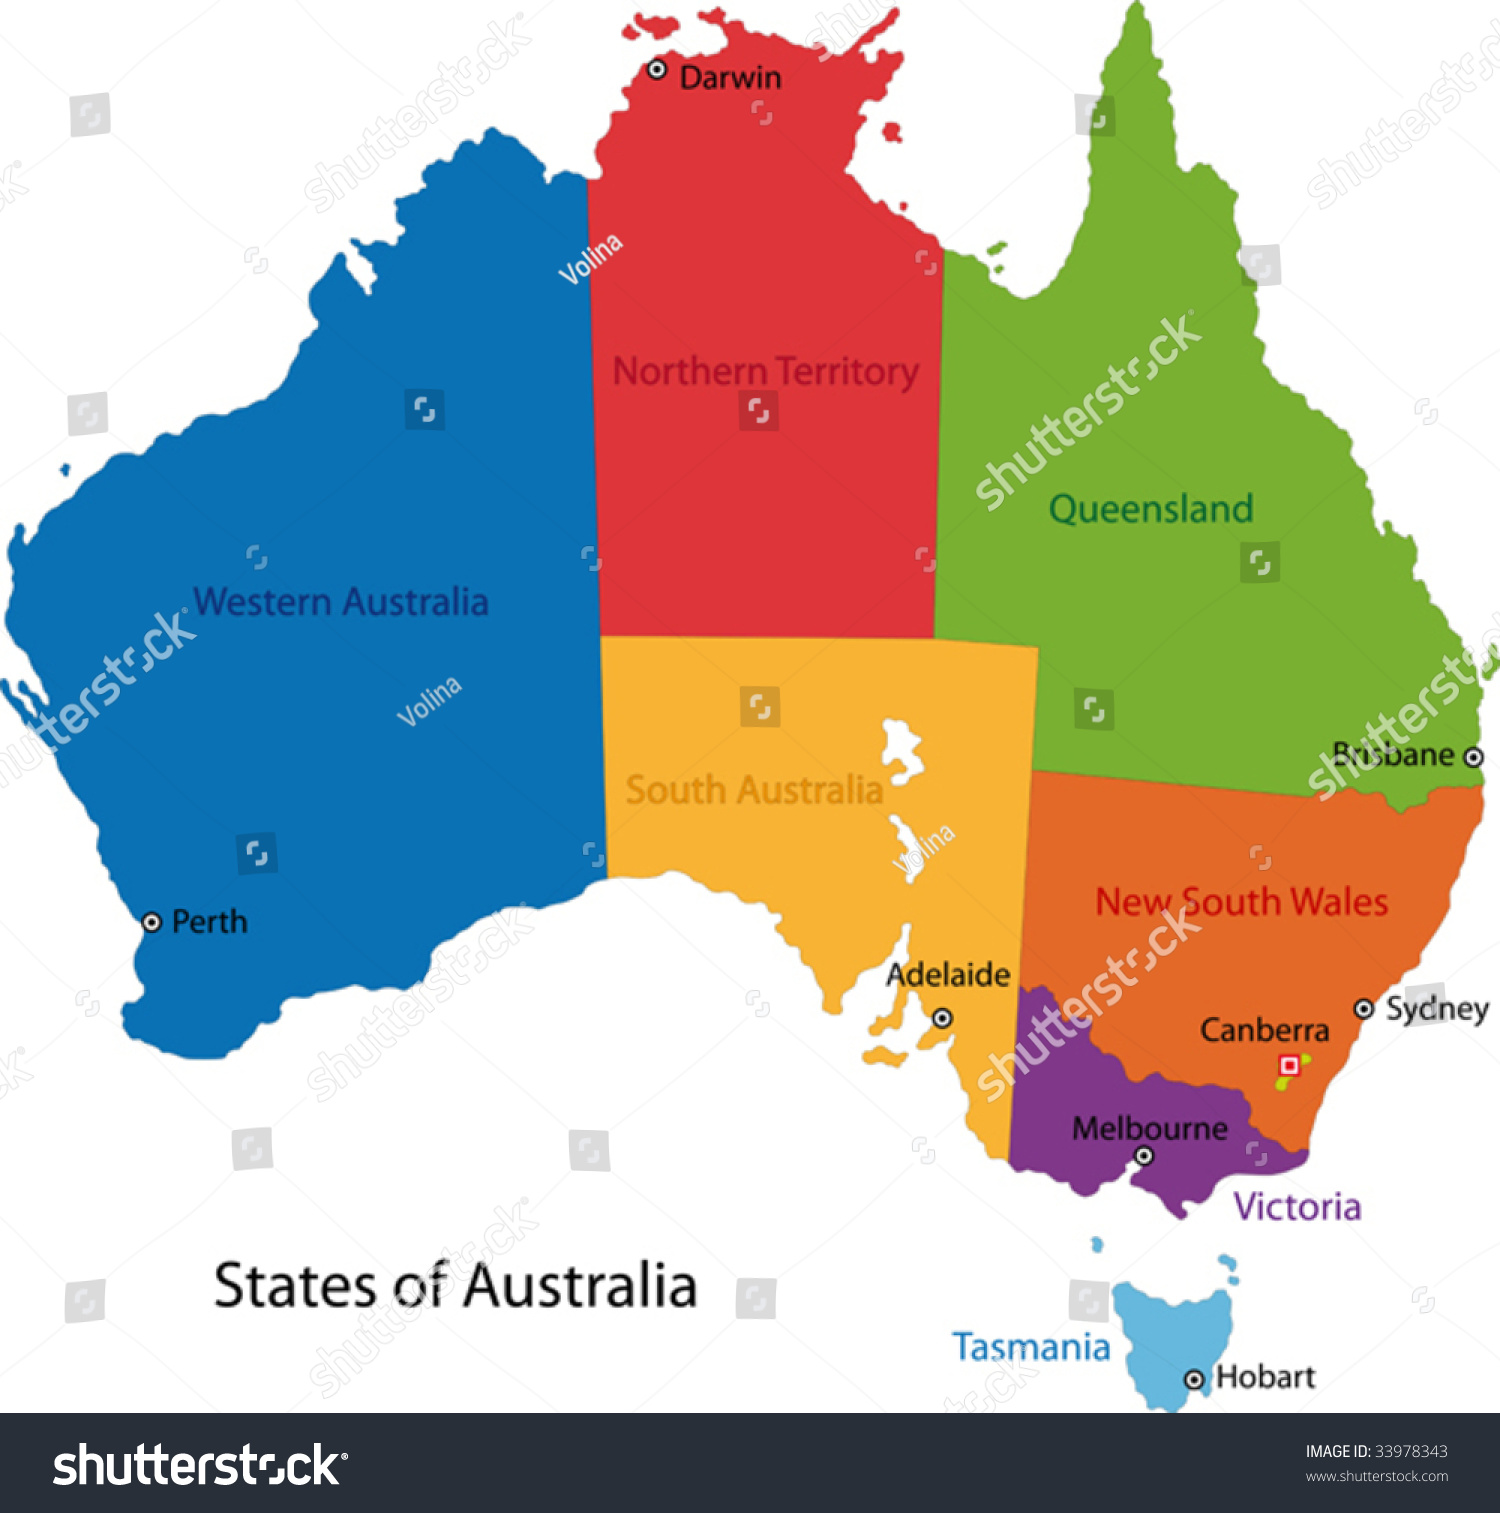 Map Of Australia With Regions